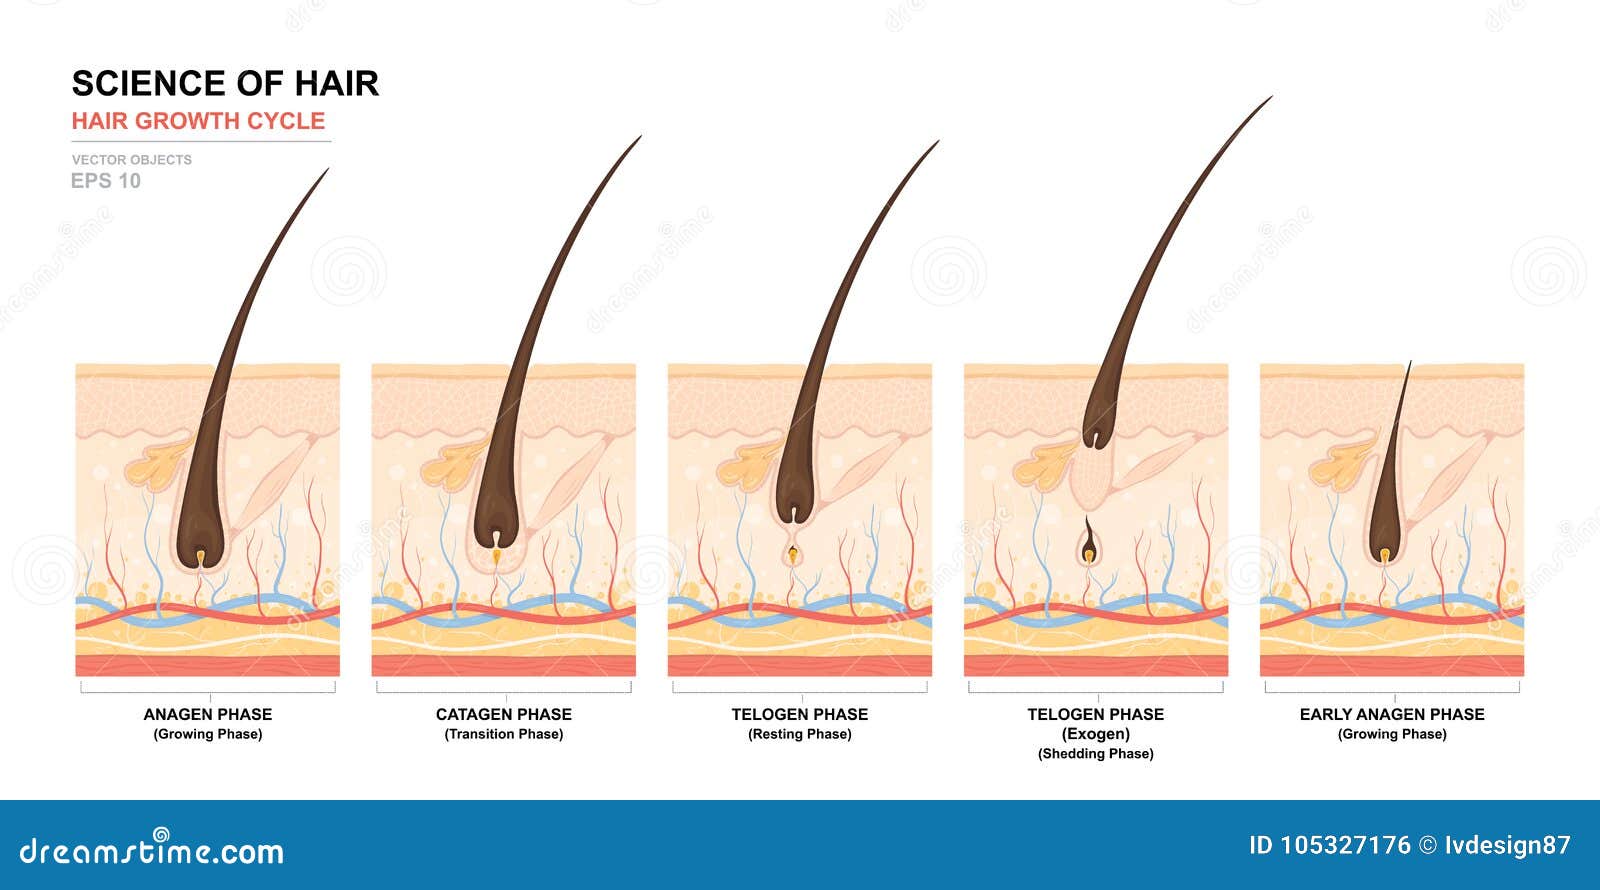 anatomical training poster. hair growth phase step by step. stages of the hair growth cycle. anagen, telogen, catagen